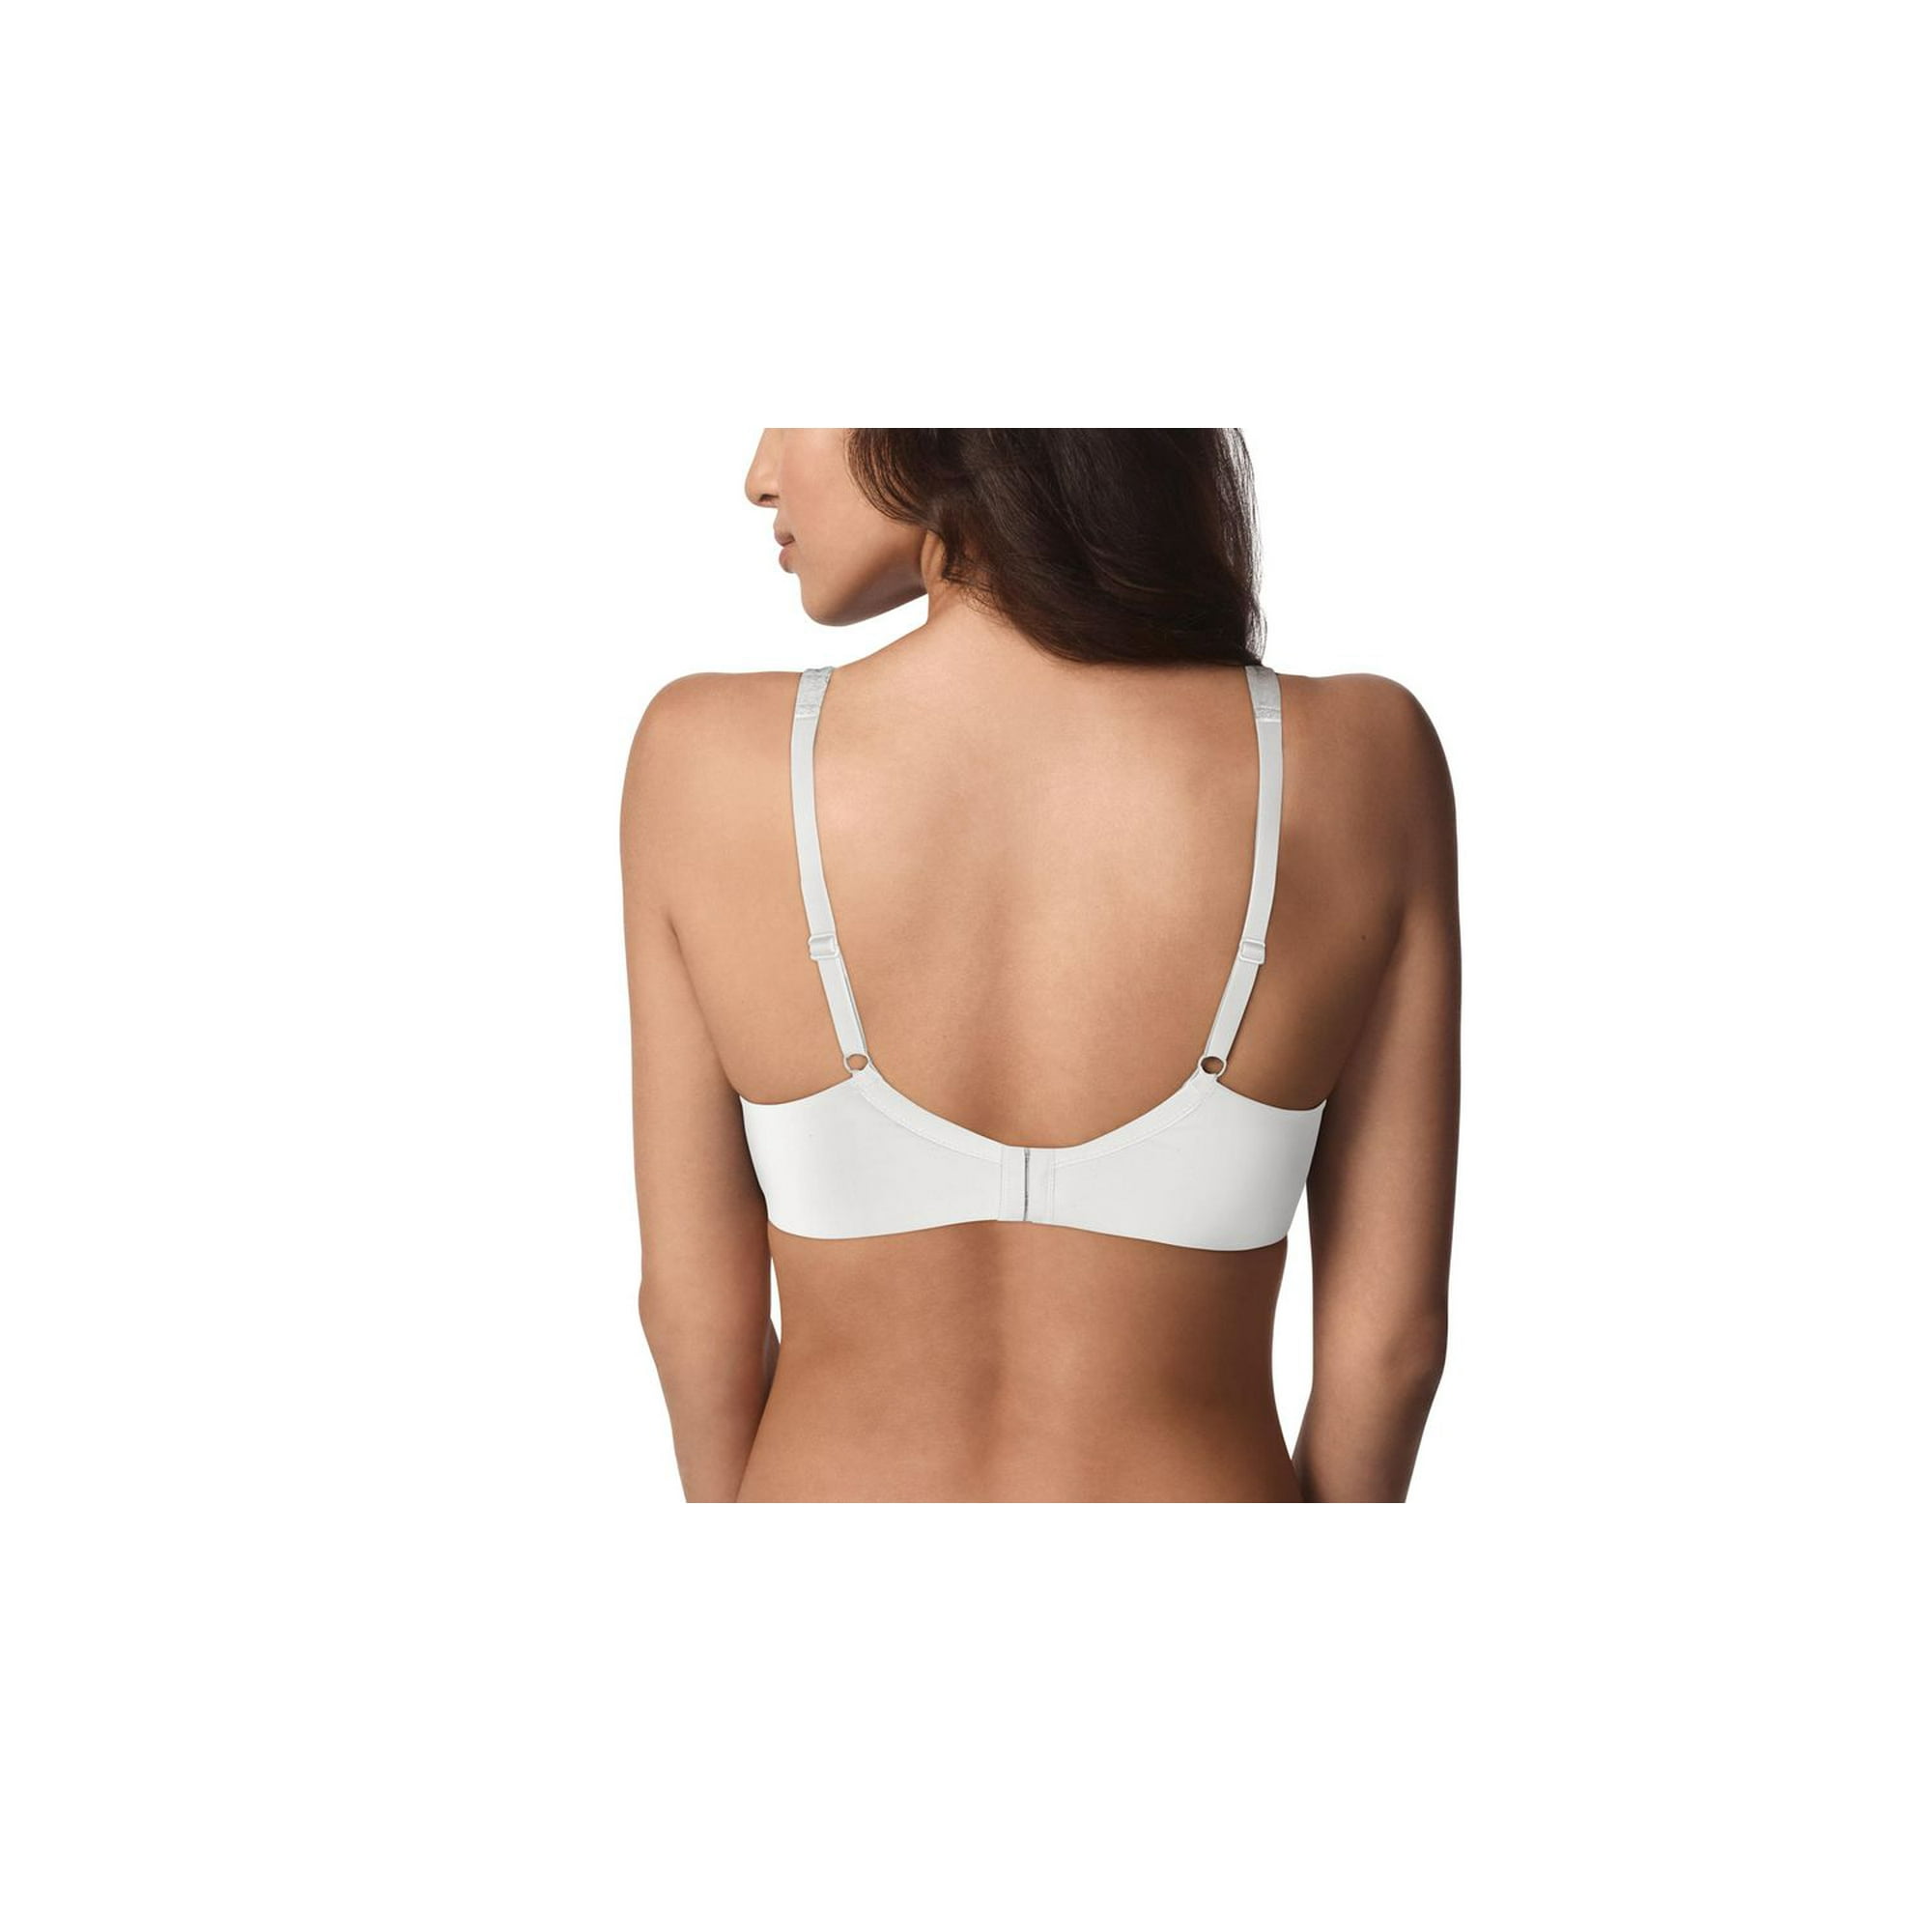 Clothing & Shoes - Socks & Underwear - Bras - Wonderbra Eco Pure Seamless  Wireless Bra With Lift - Online Shopping for Canadians